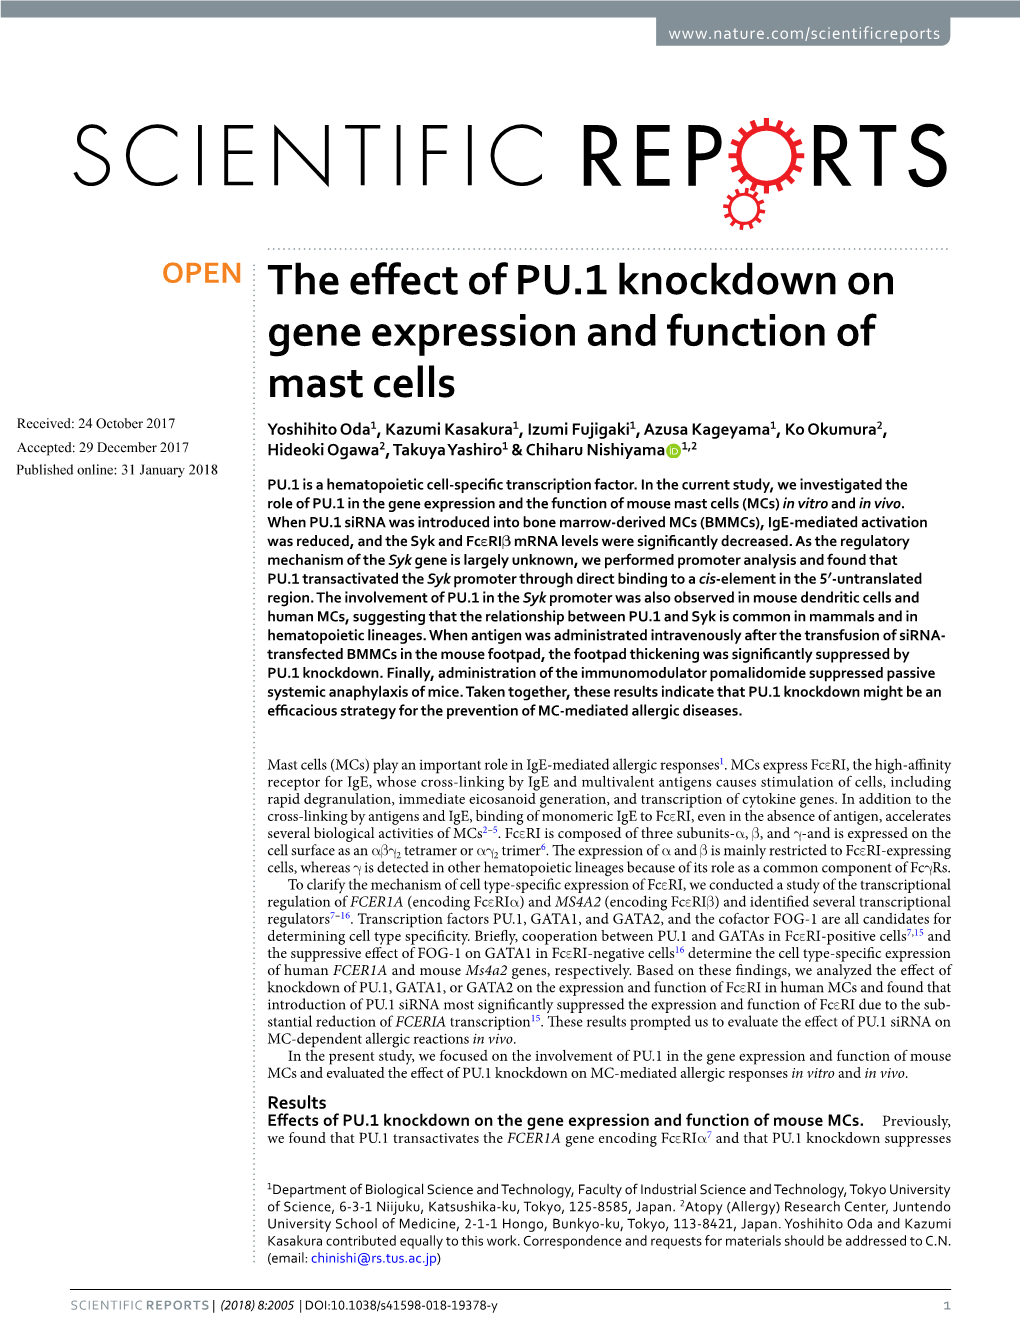 The Effect of PU.1 Knockdown on Gene Expression and Function of Mast Cells